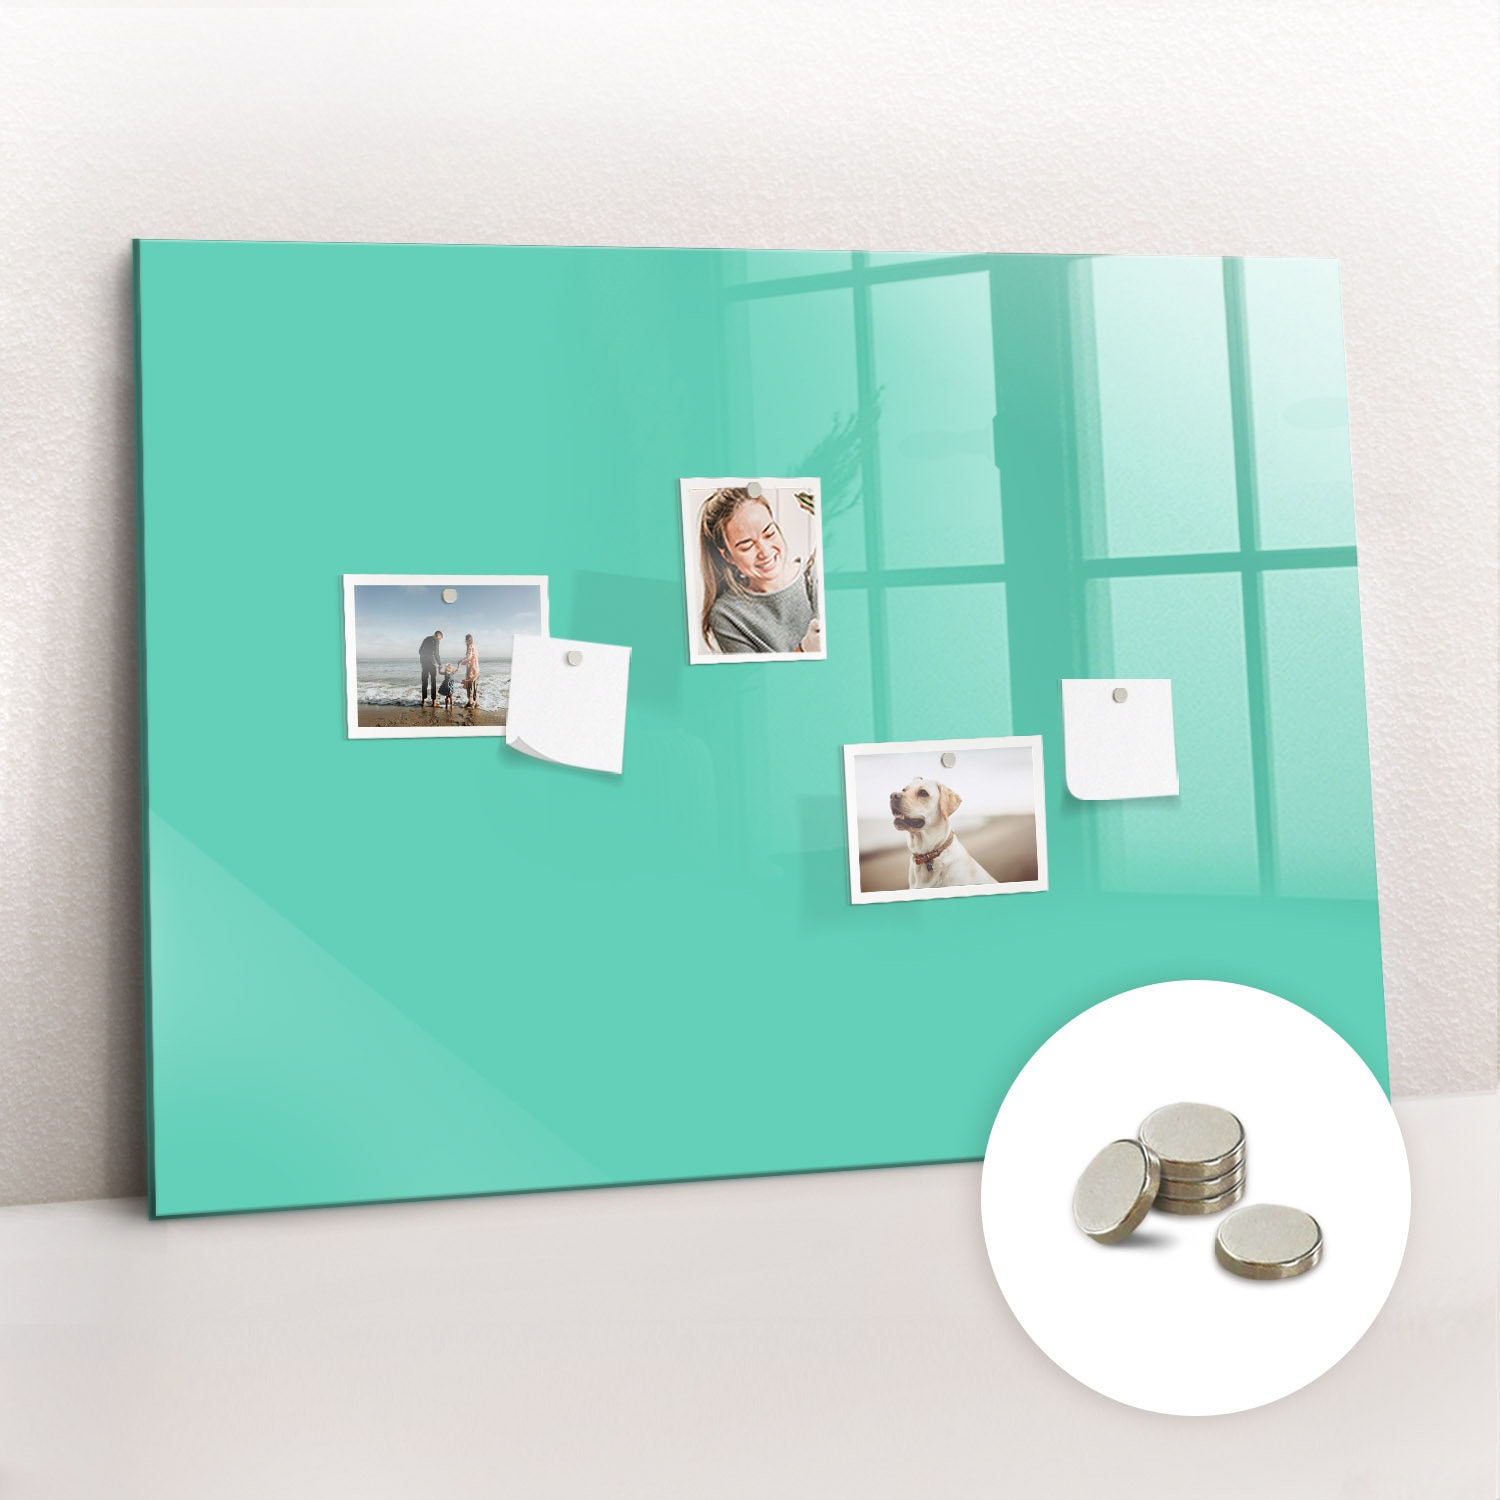 A2 Plain Magnetic Sheet (0.4mm Thickness) by The Magnet Shop®